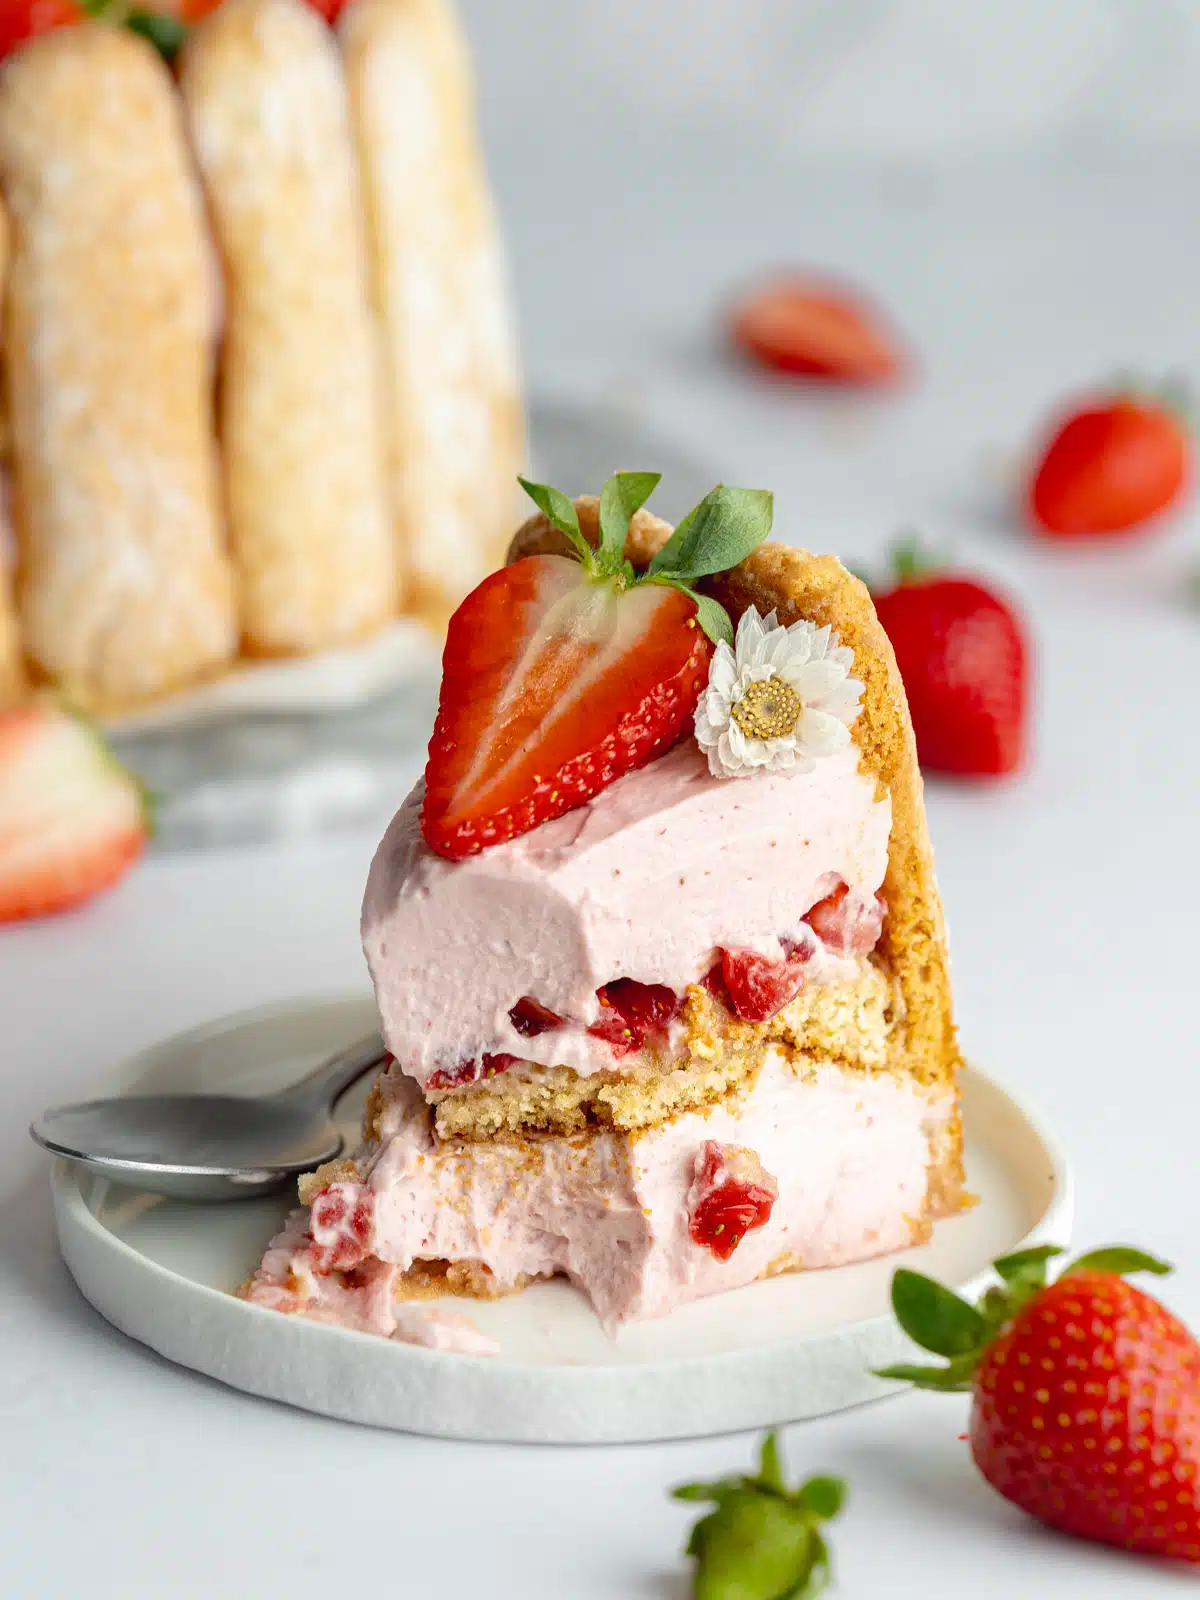 a slice of strawberry charlotte cake on a small dessert plate with a spoonful taken from it showing the creamy texture.